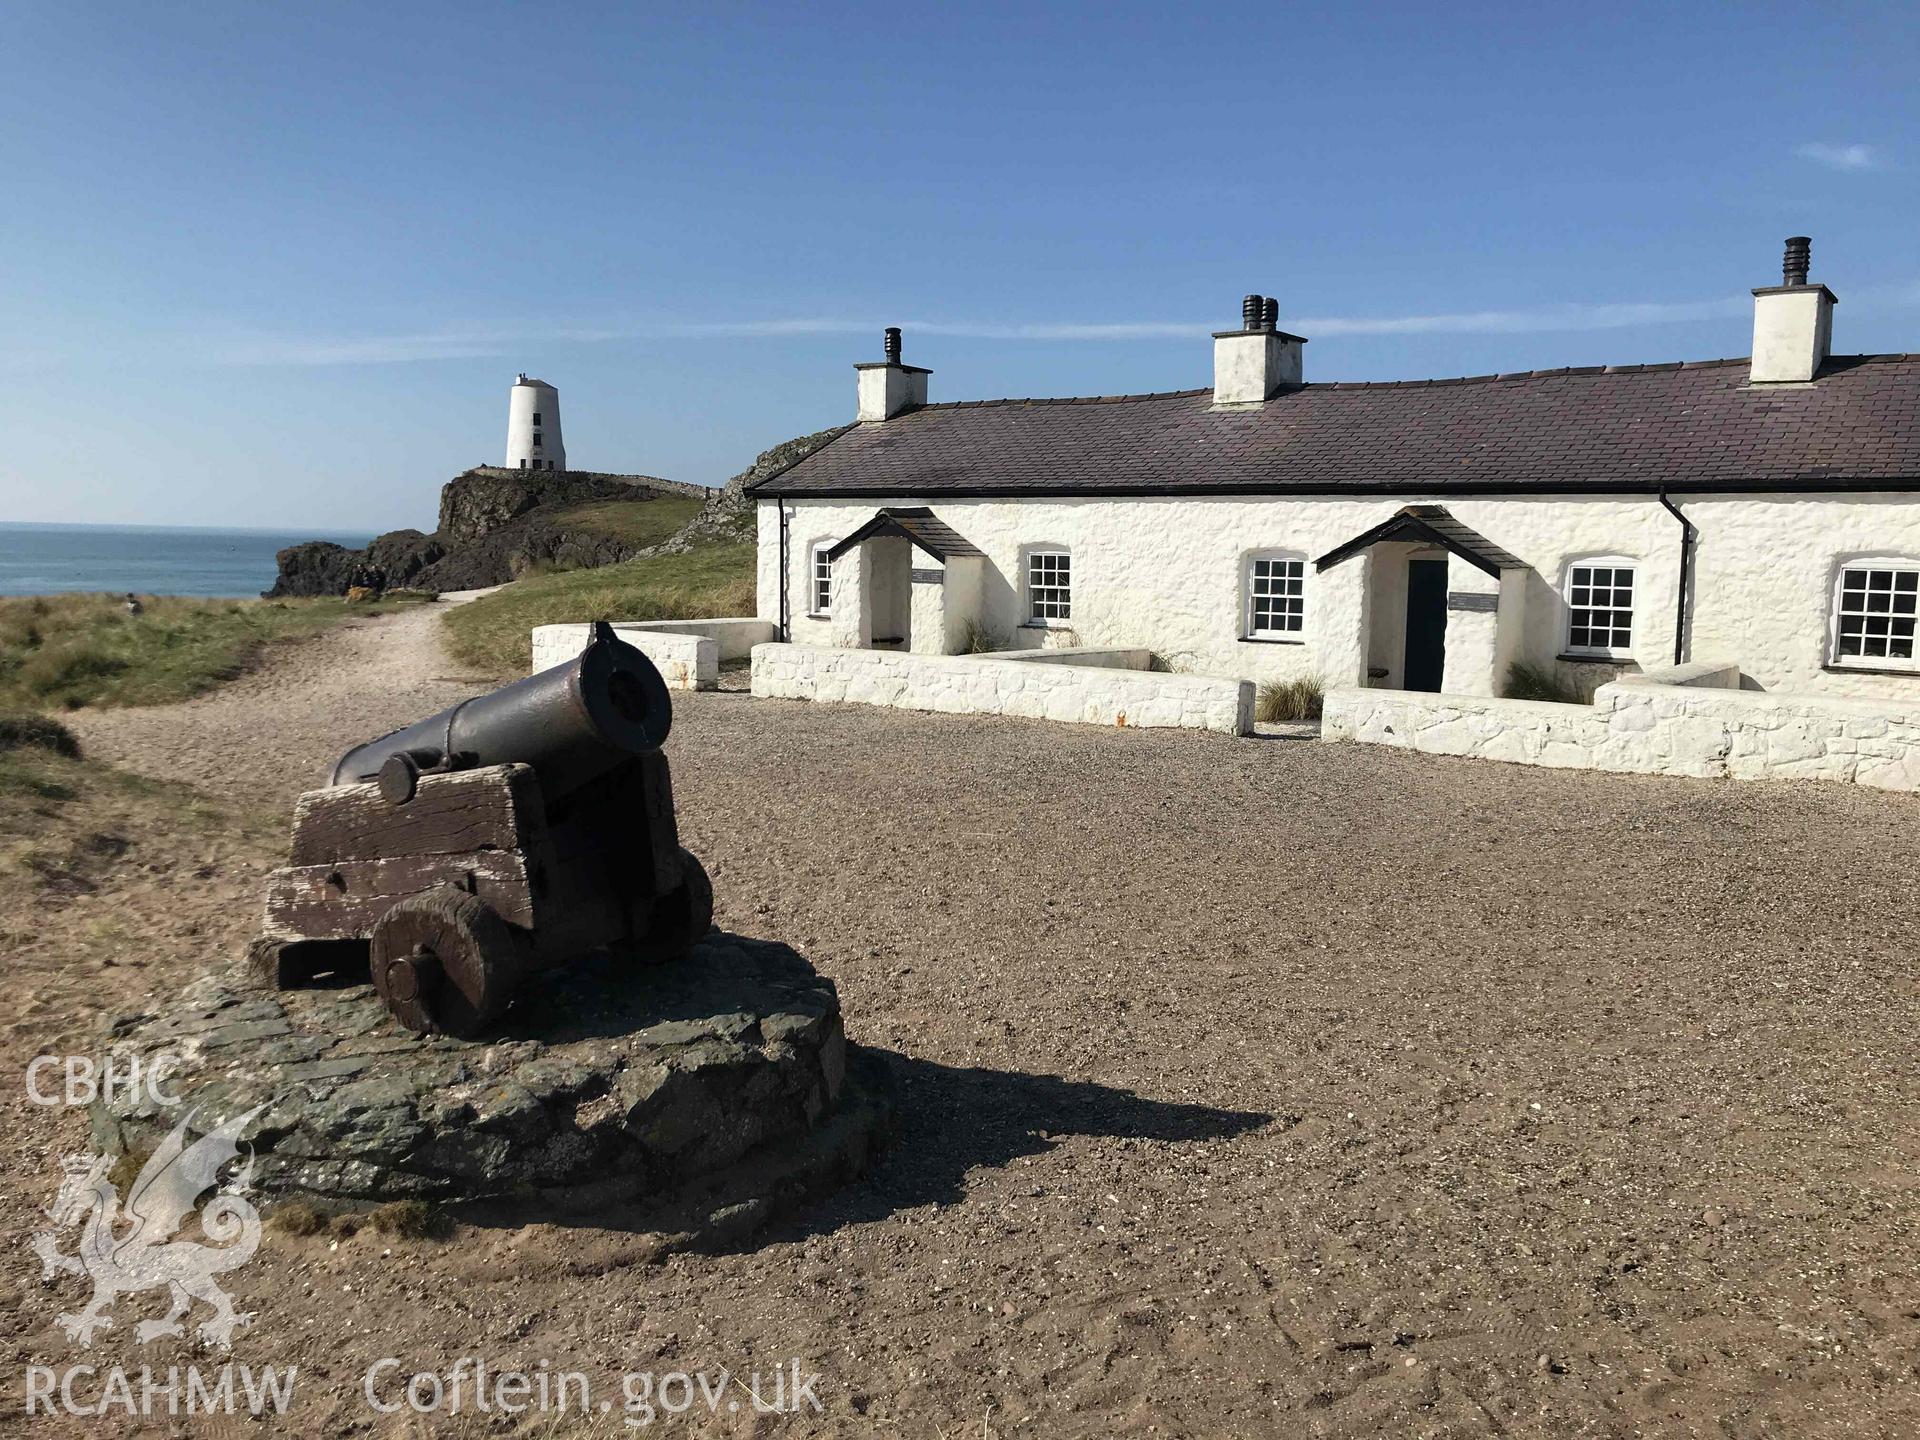 Digital photograph showing general view of the Pilots House on Llanddwyn Island, produced by Paul Davis in 2020